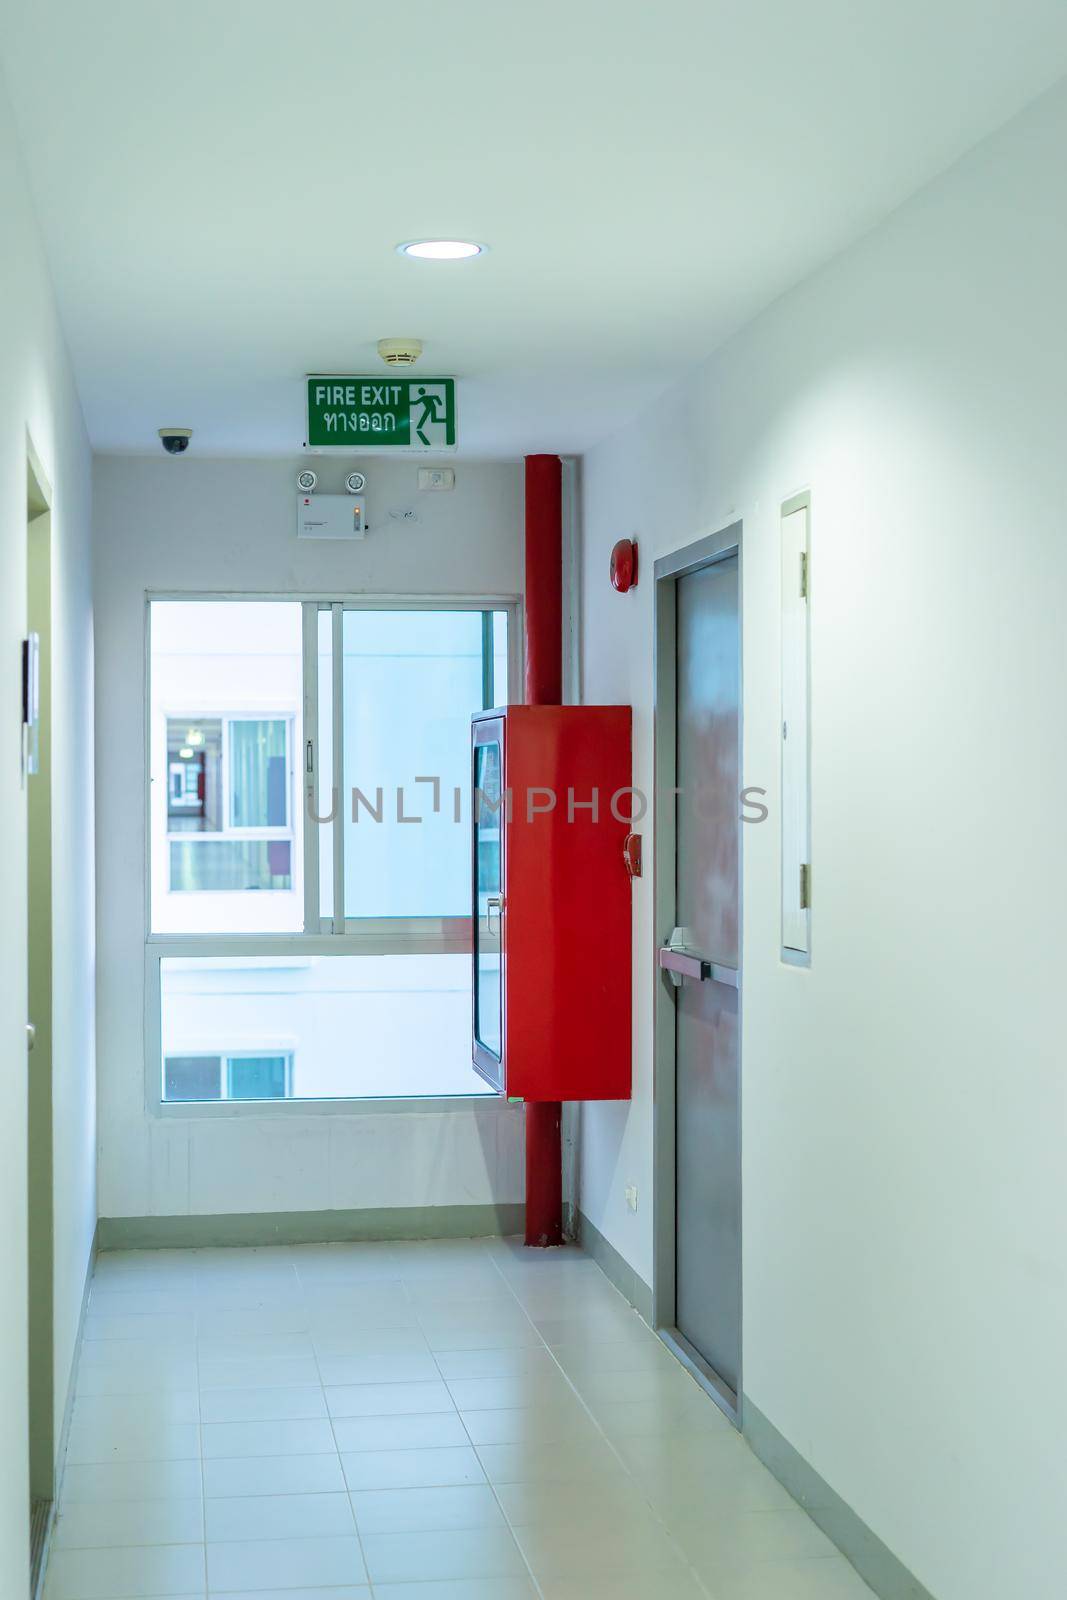 Fire escape doors and fire extinguishers in building